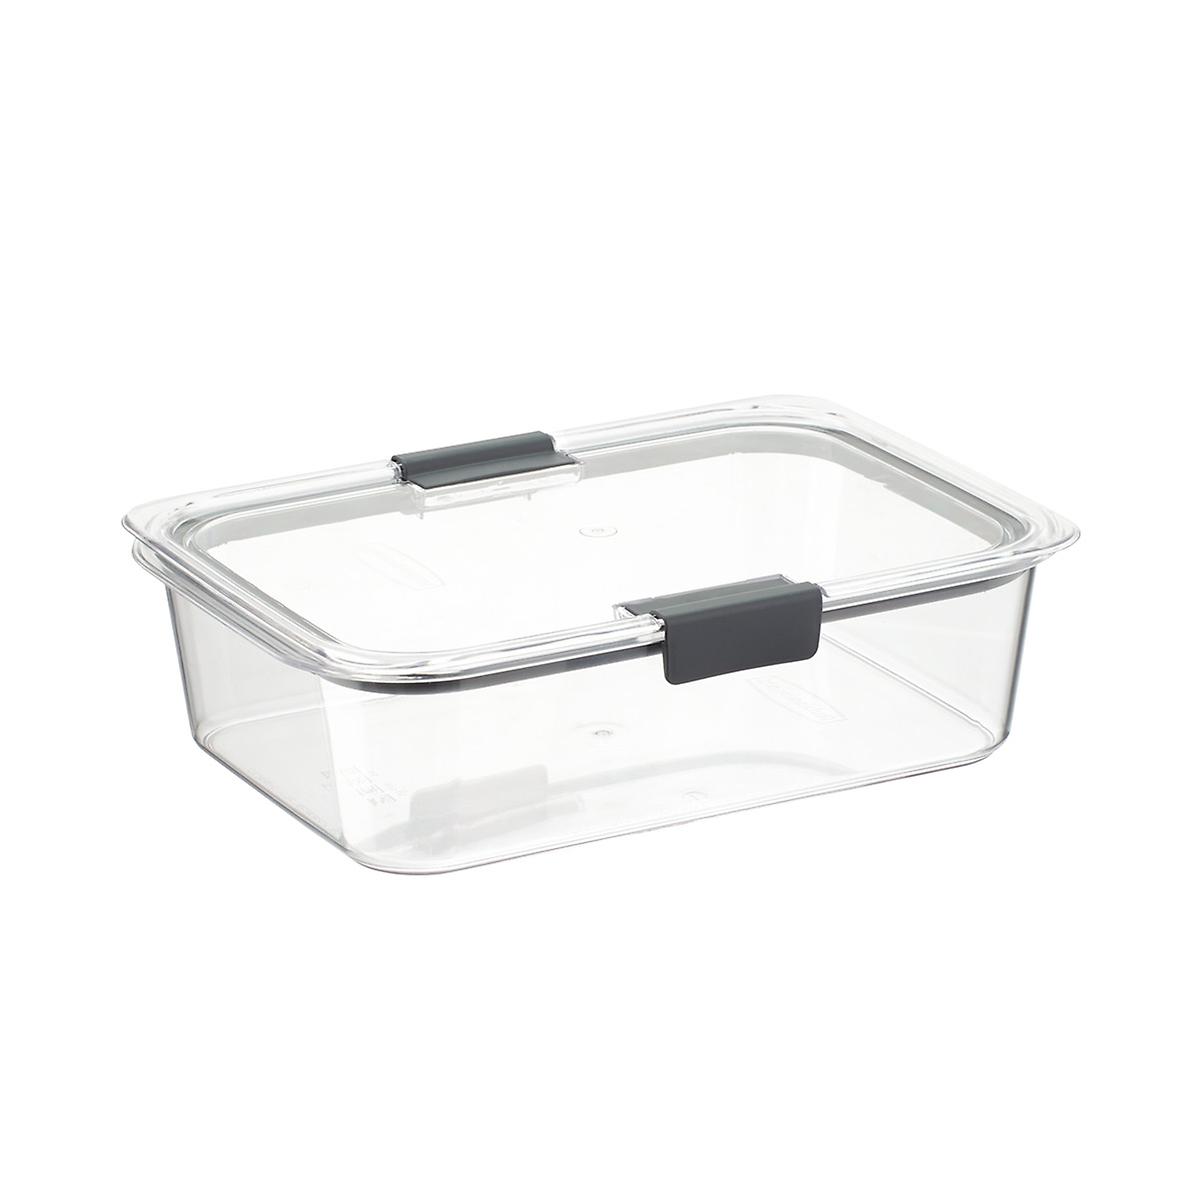 Rubbermaid Brilliance Food Storage Containers The Container Store